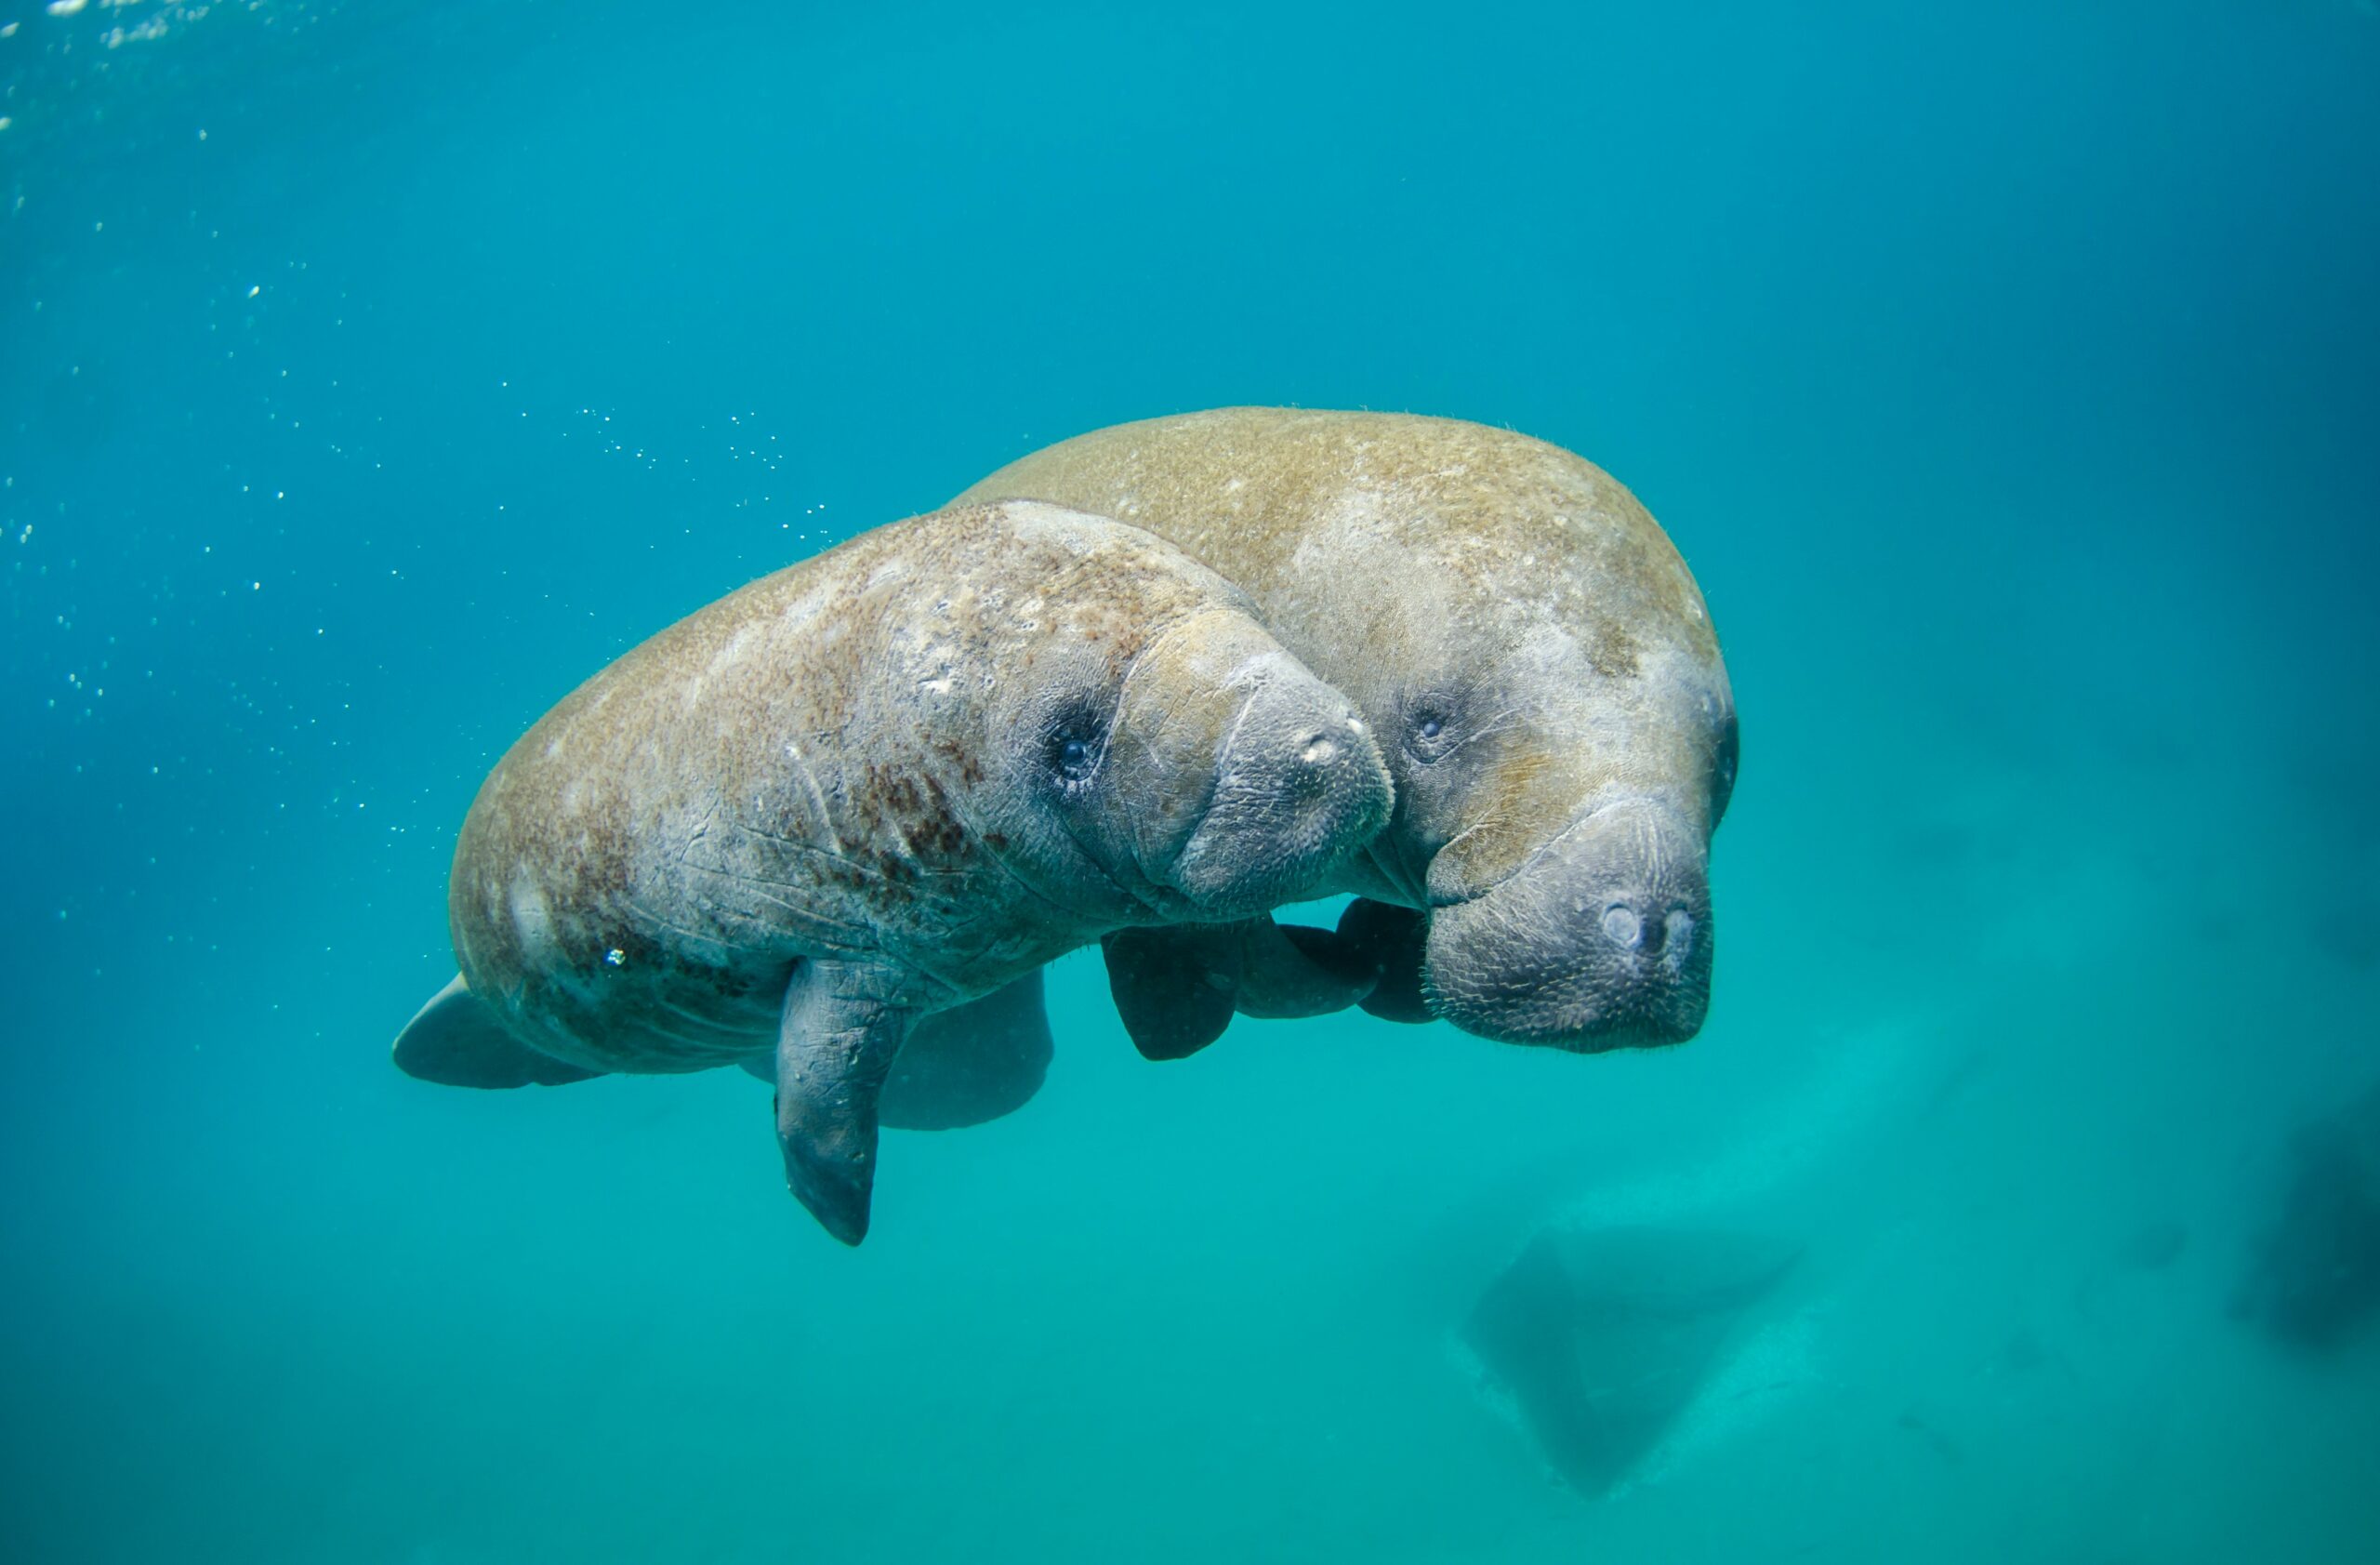 Adult manatee with a baby calf floating in the water